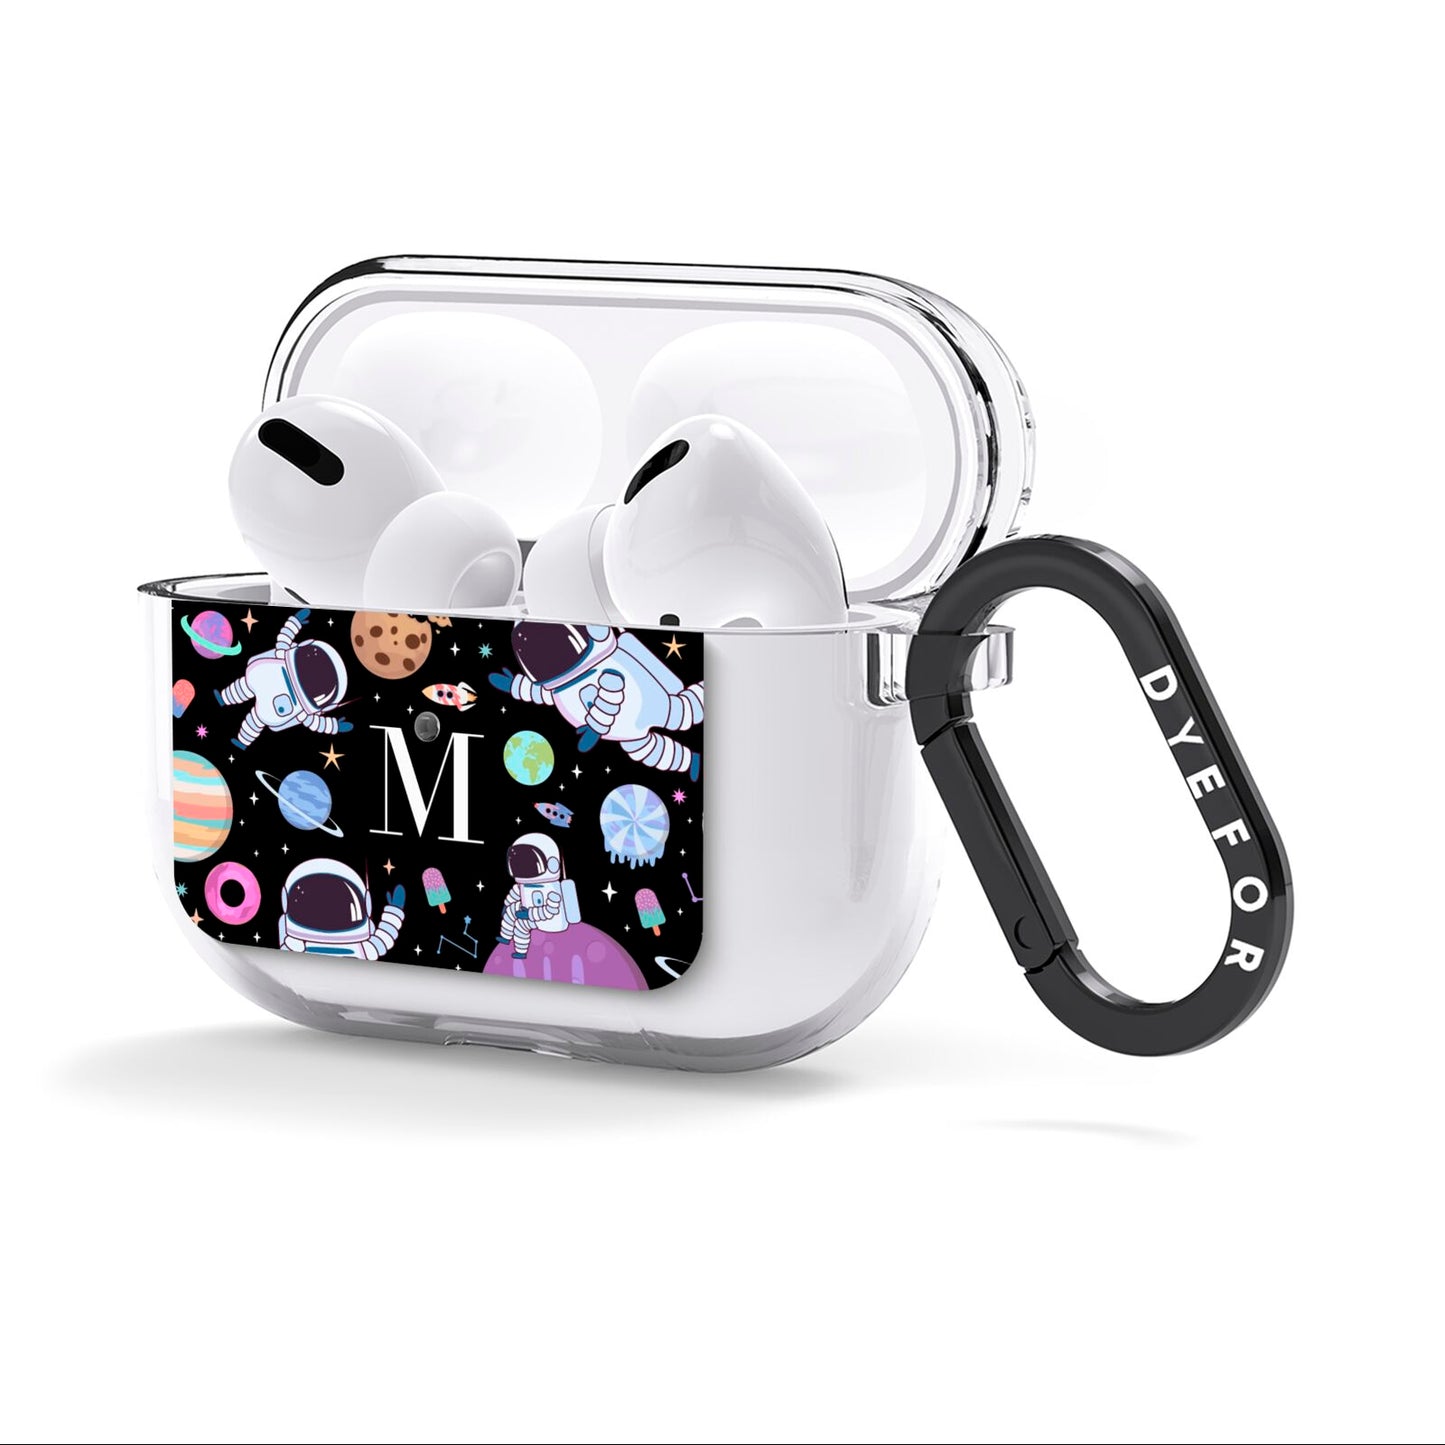 Initialled Candy Space Scene AirPods Clear Case 3rd Gen Side Image